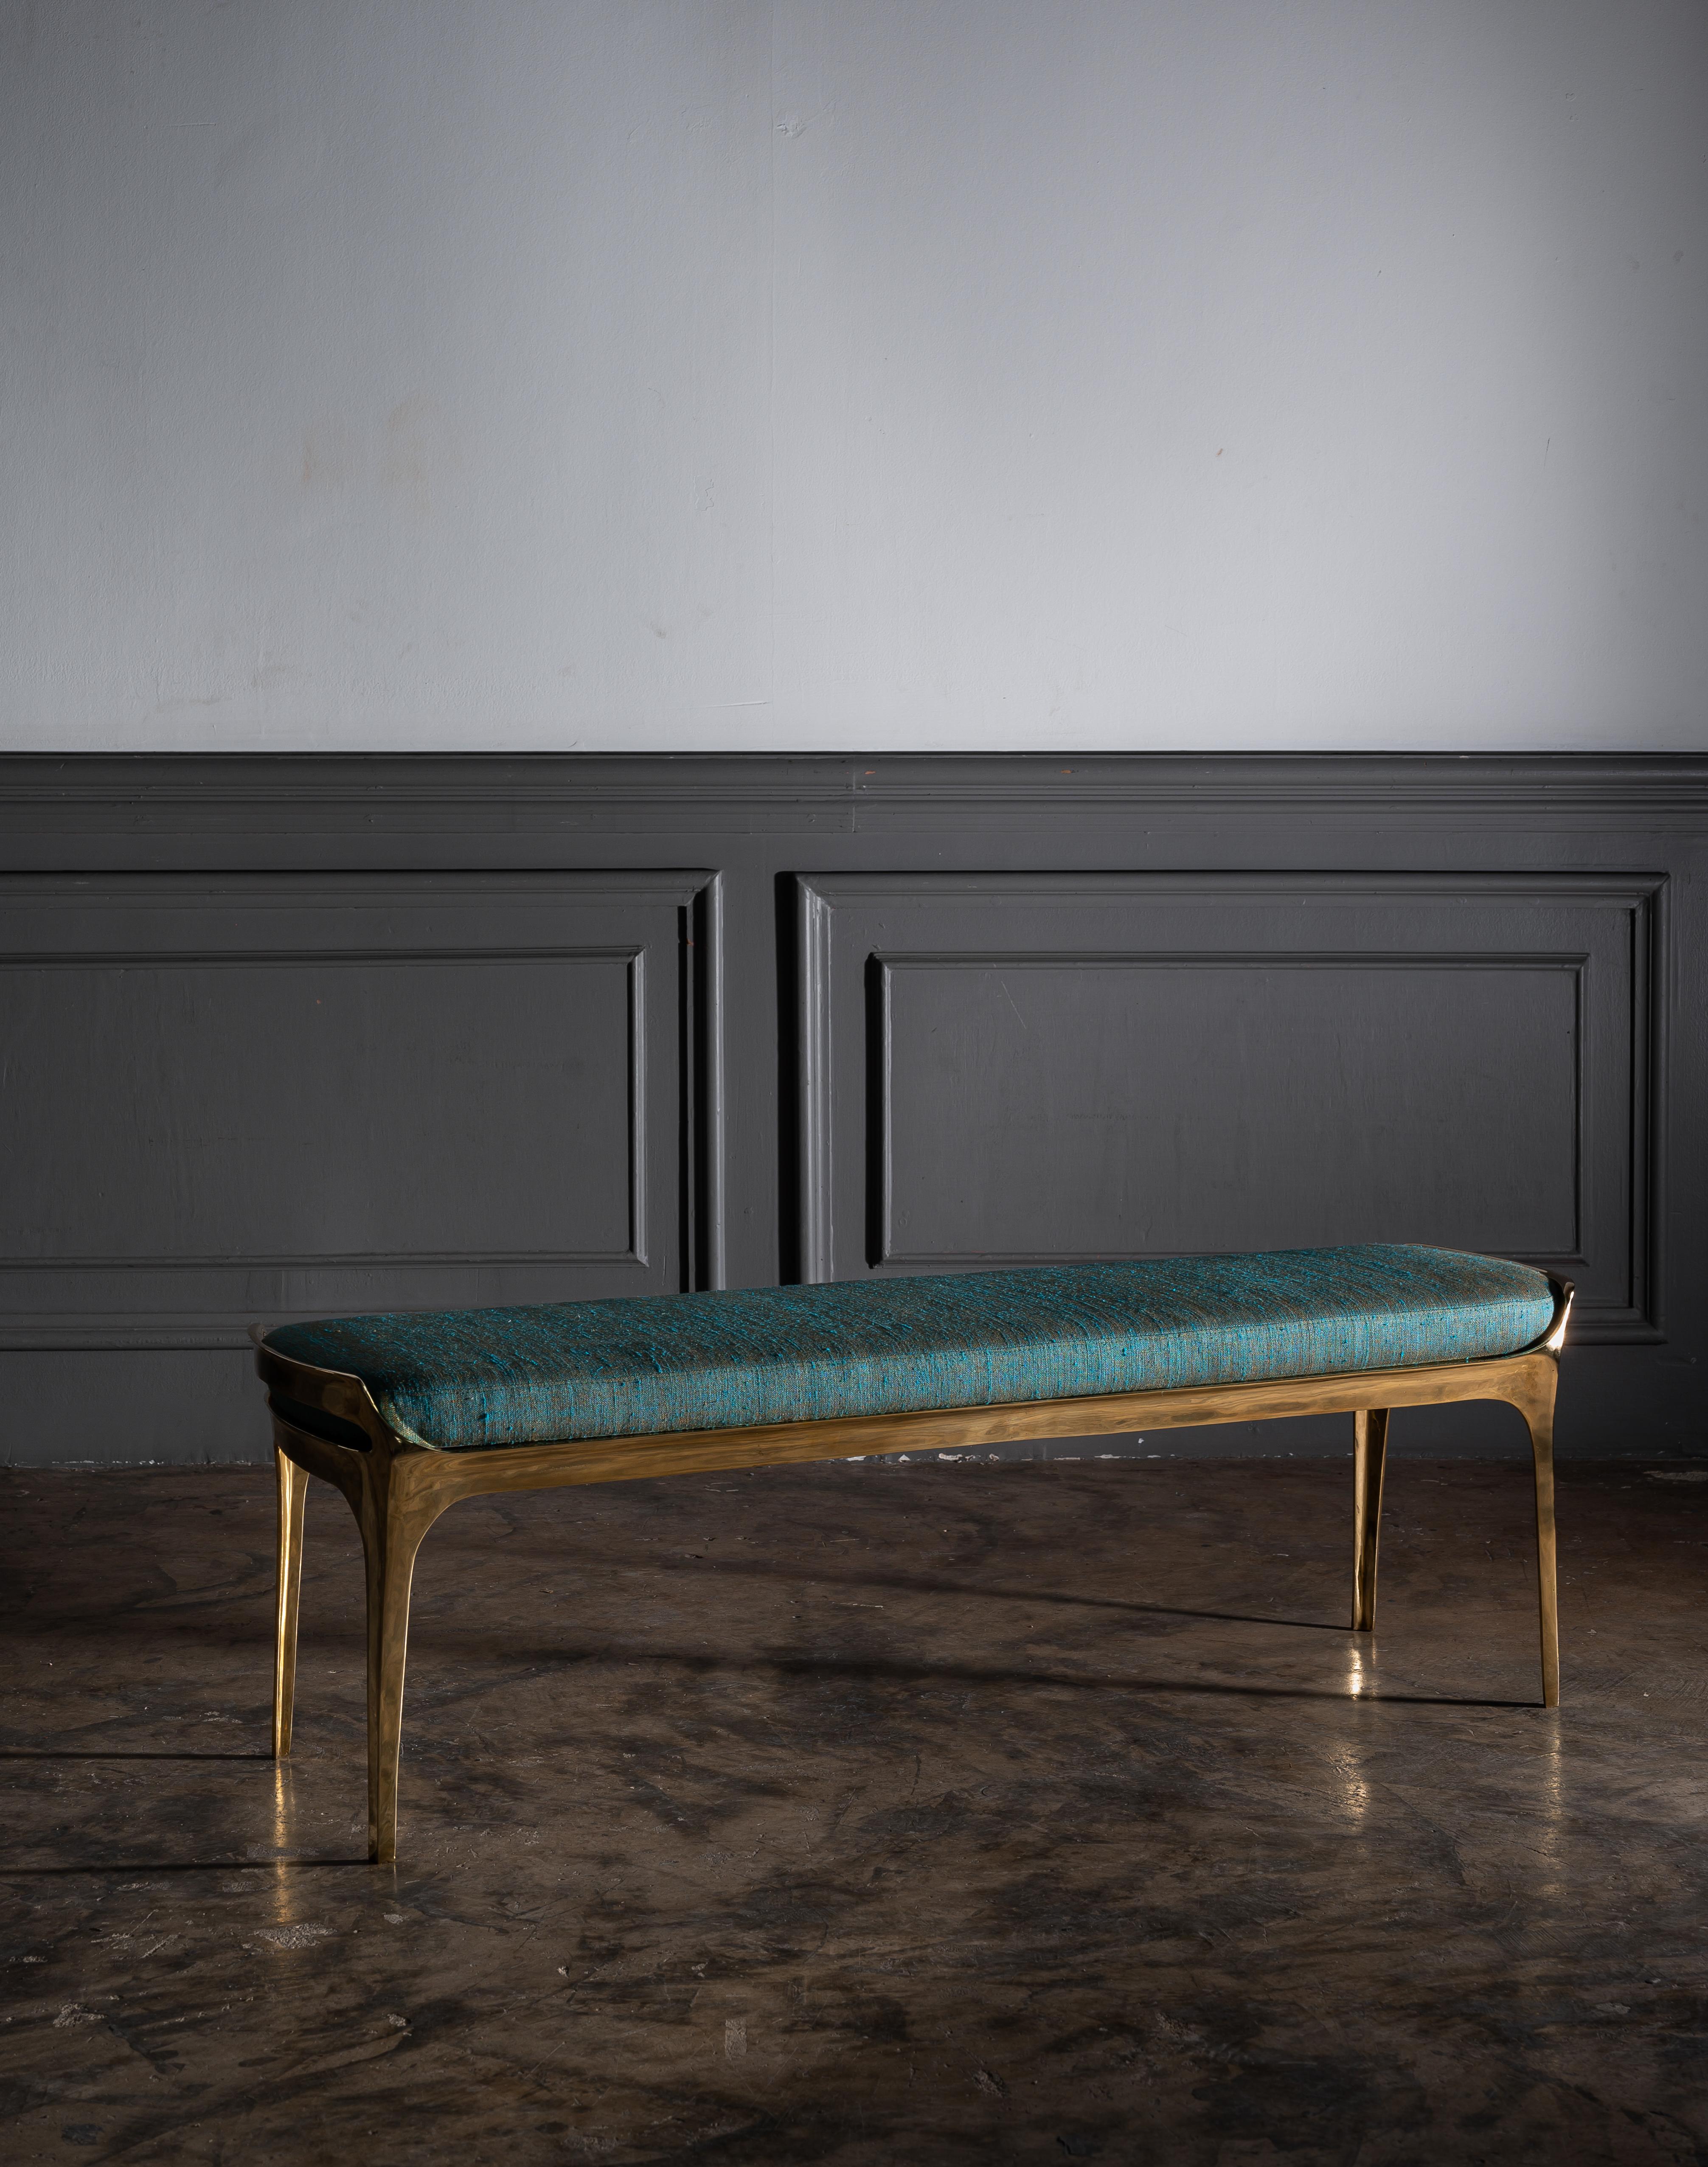 Available now and ready to ship! 

Sculptural cast bronze bruda bench in polished gold bronze by Elan Atelier.

Cast bronze Bruda bench in polished gold finish with marine blue green silk seat cushion. 

Dimensions/
W 50 x D 13.8 x Hh 16